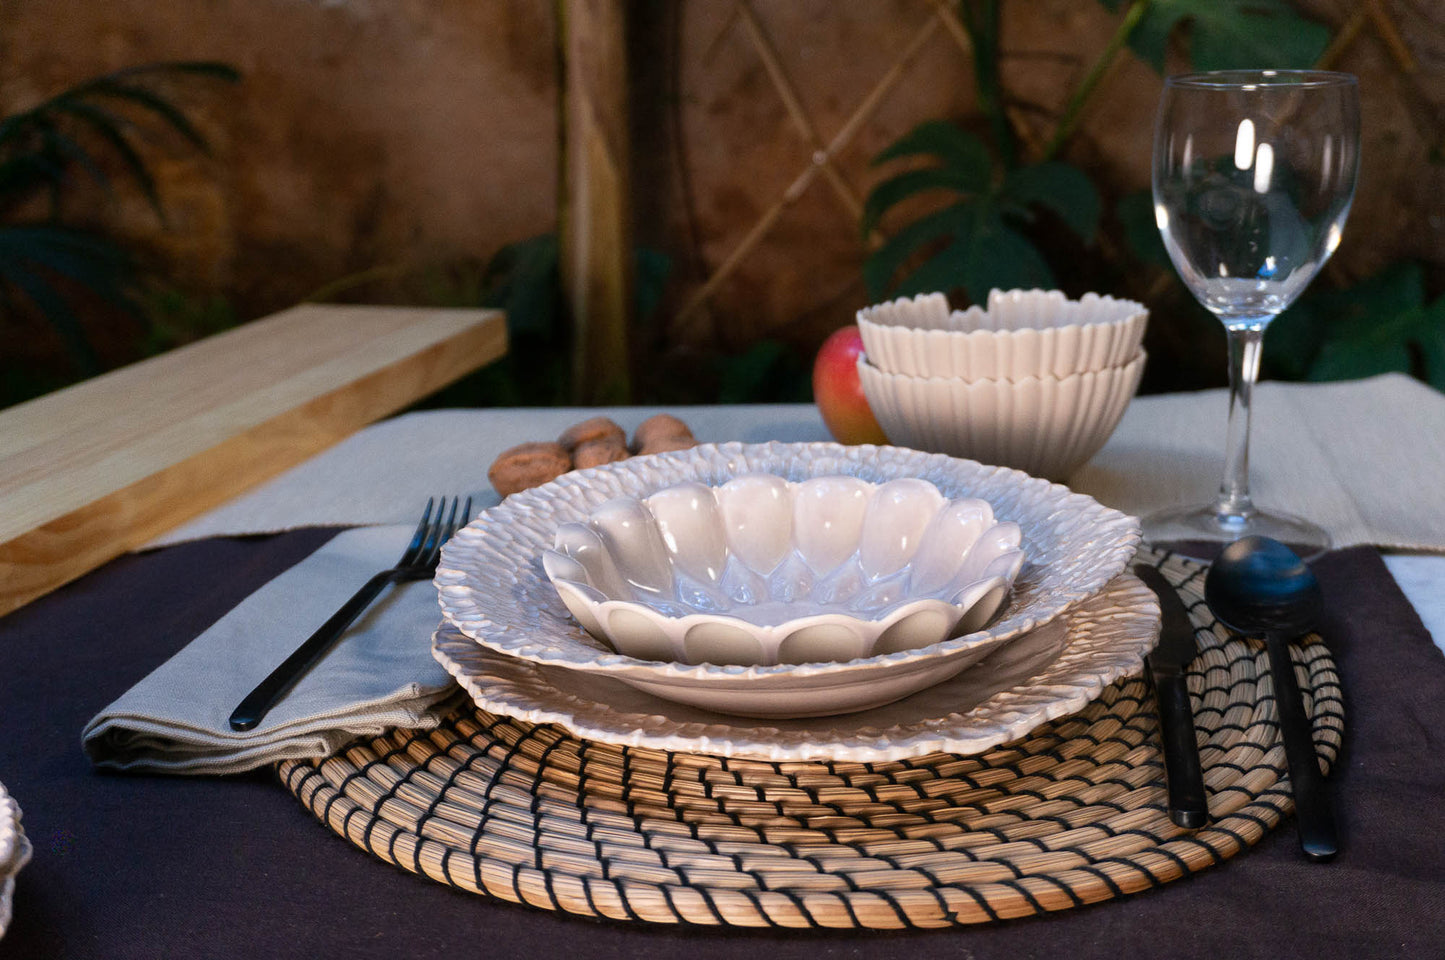 Medium Rimmed Plate 3-Piece Place Setting | Wave Bowl | Table Setting